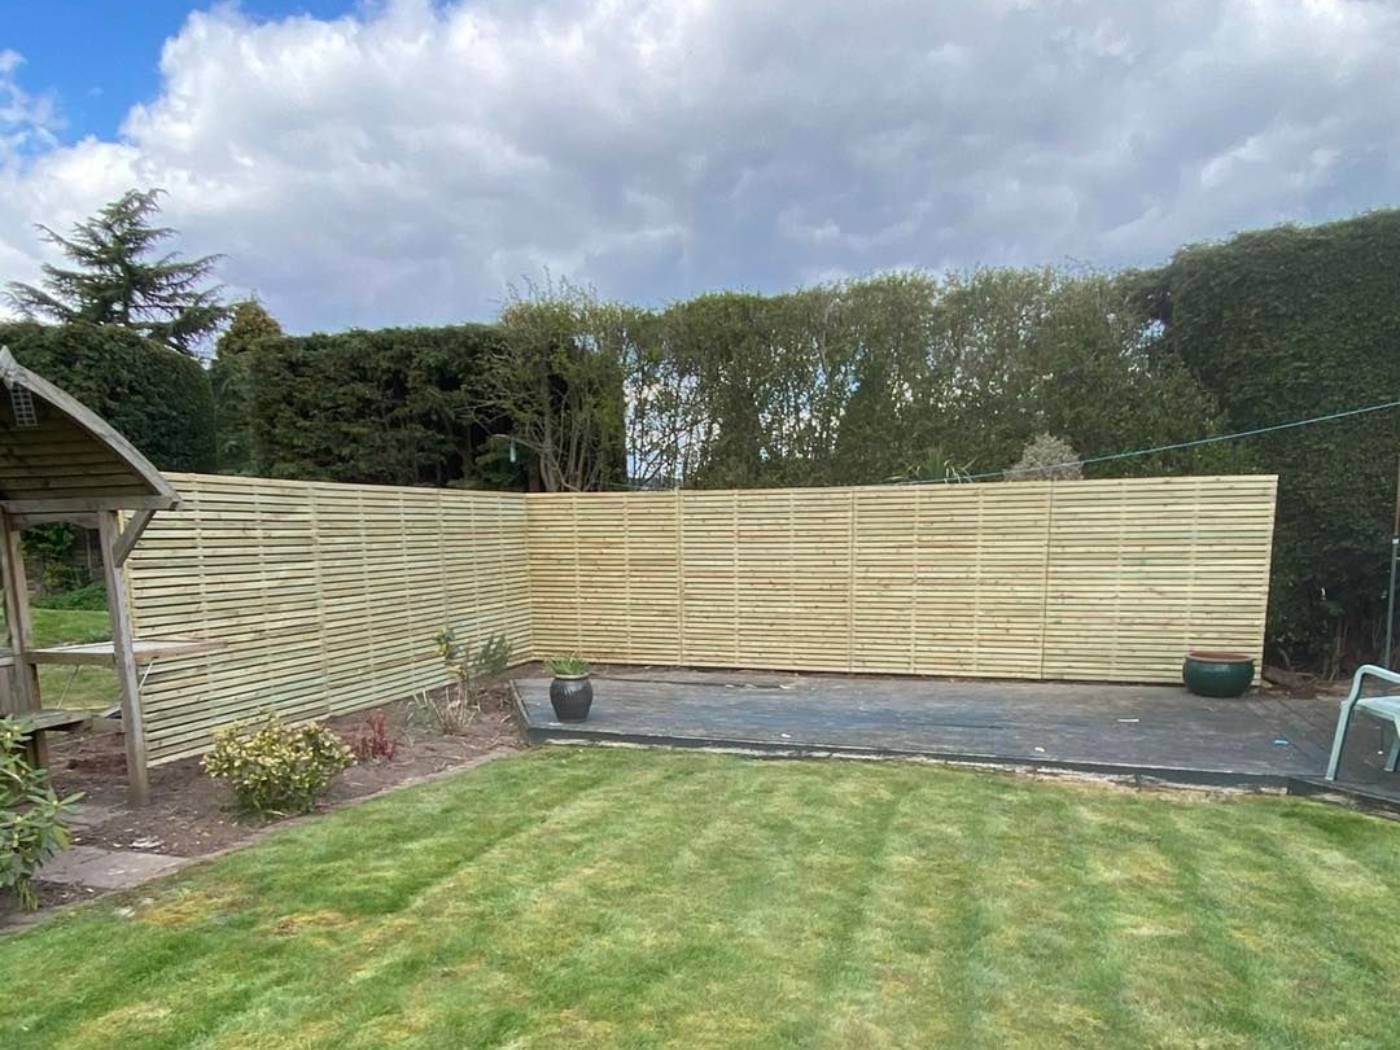 completed garden fencing in Keyworth